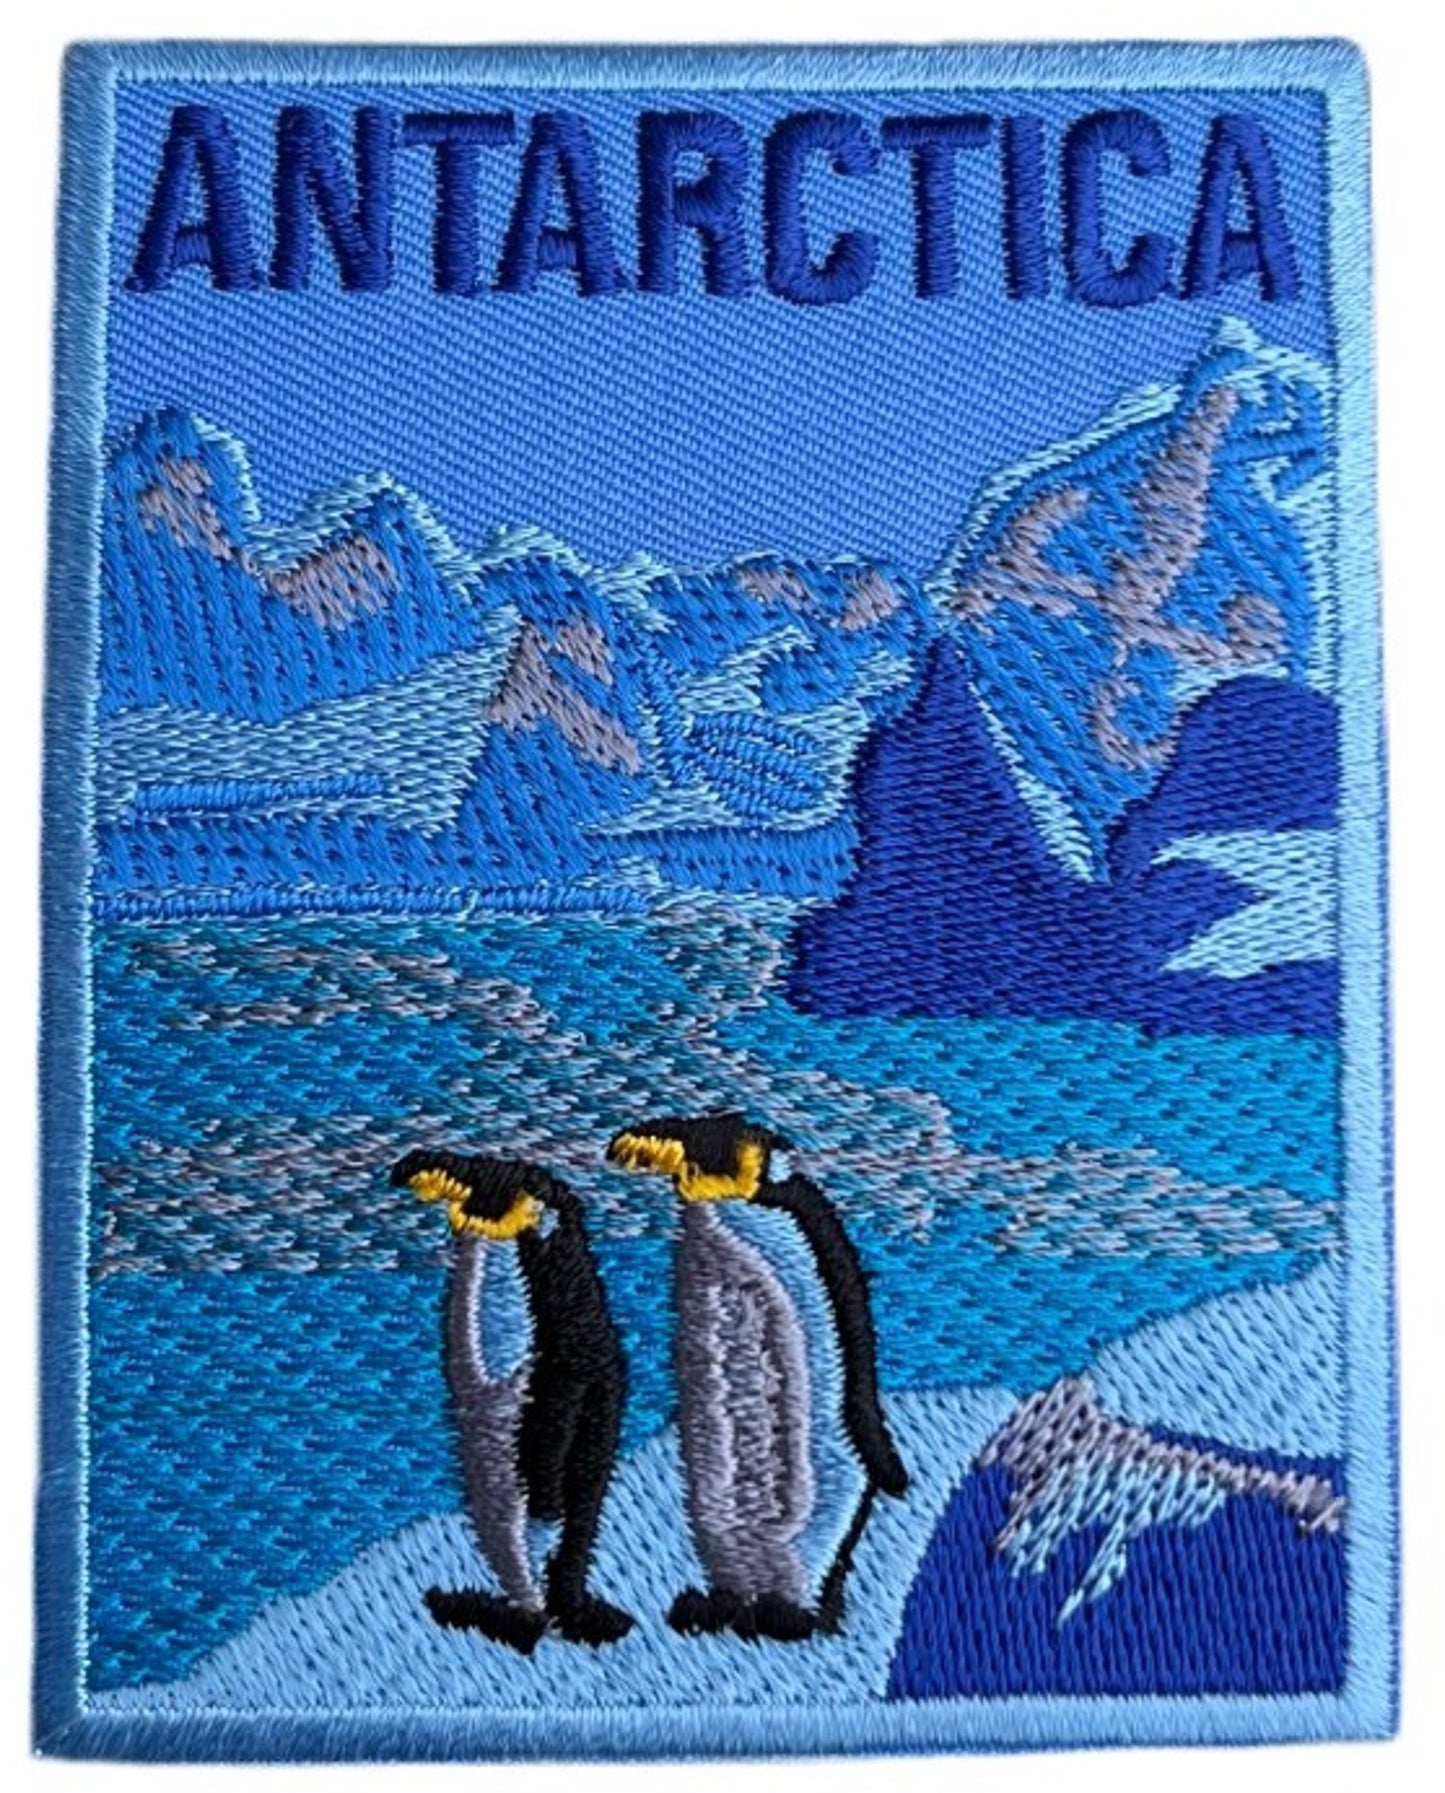 Antarctica Patch (3.5 Inch) Iron-on / Sew-on Badge Travel Souvenir South Pole Emblem Perfect for Backpack, Jacket, Hat, Bag DIY Gift Patches